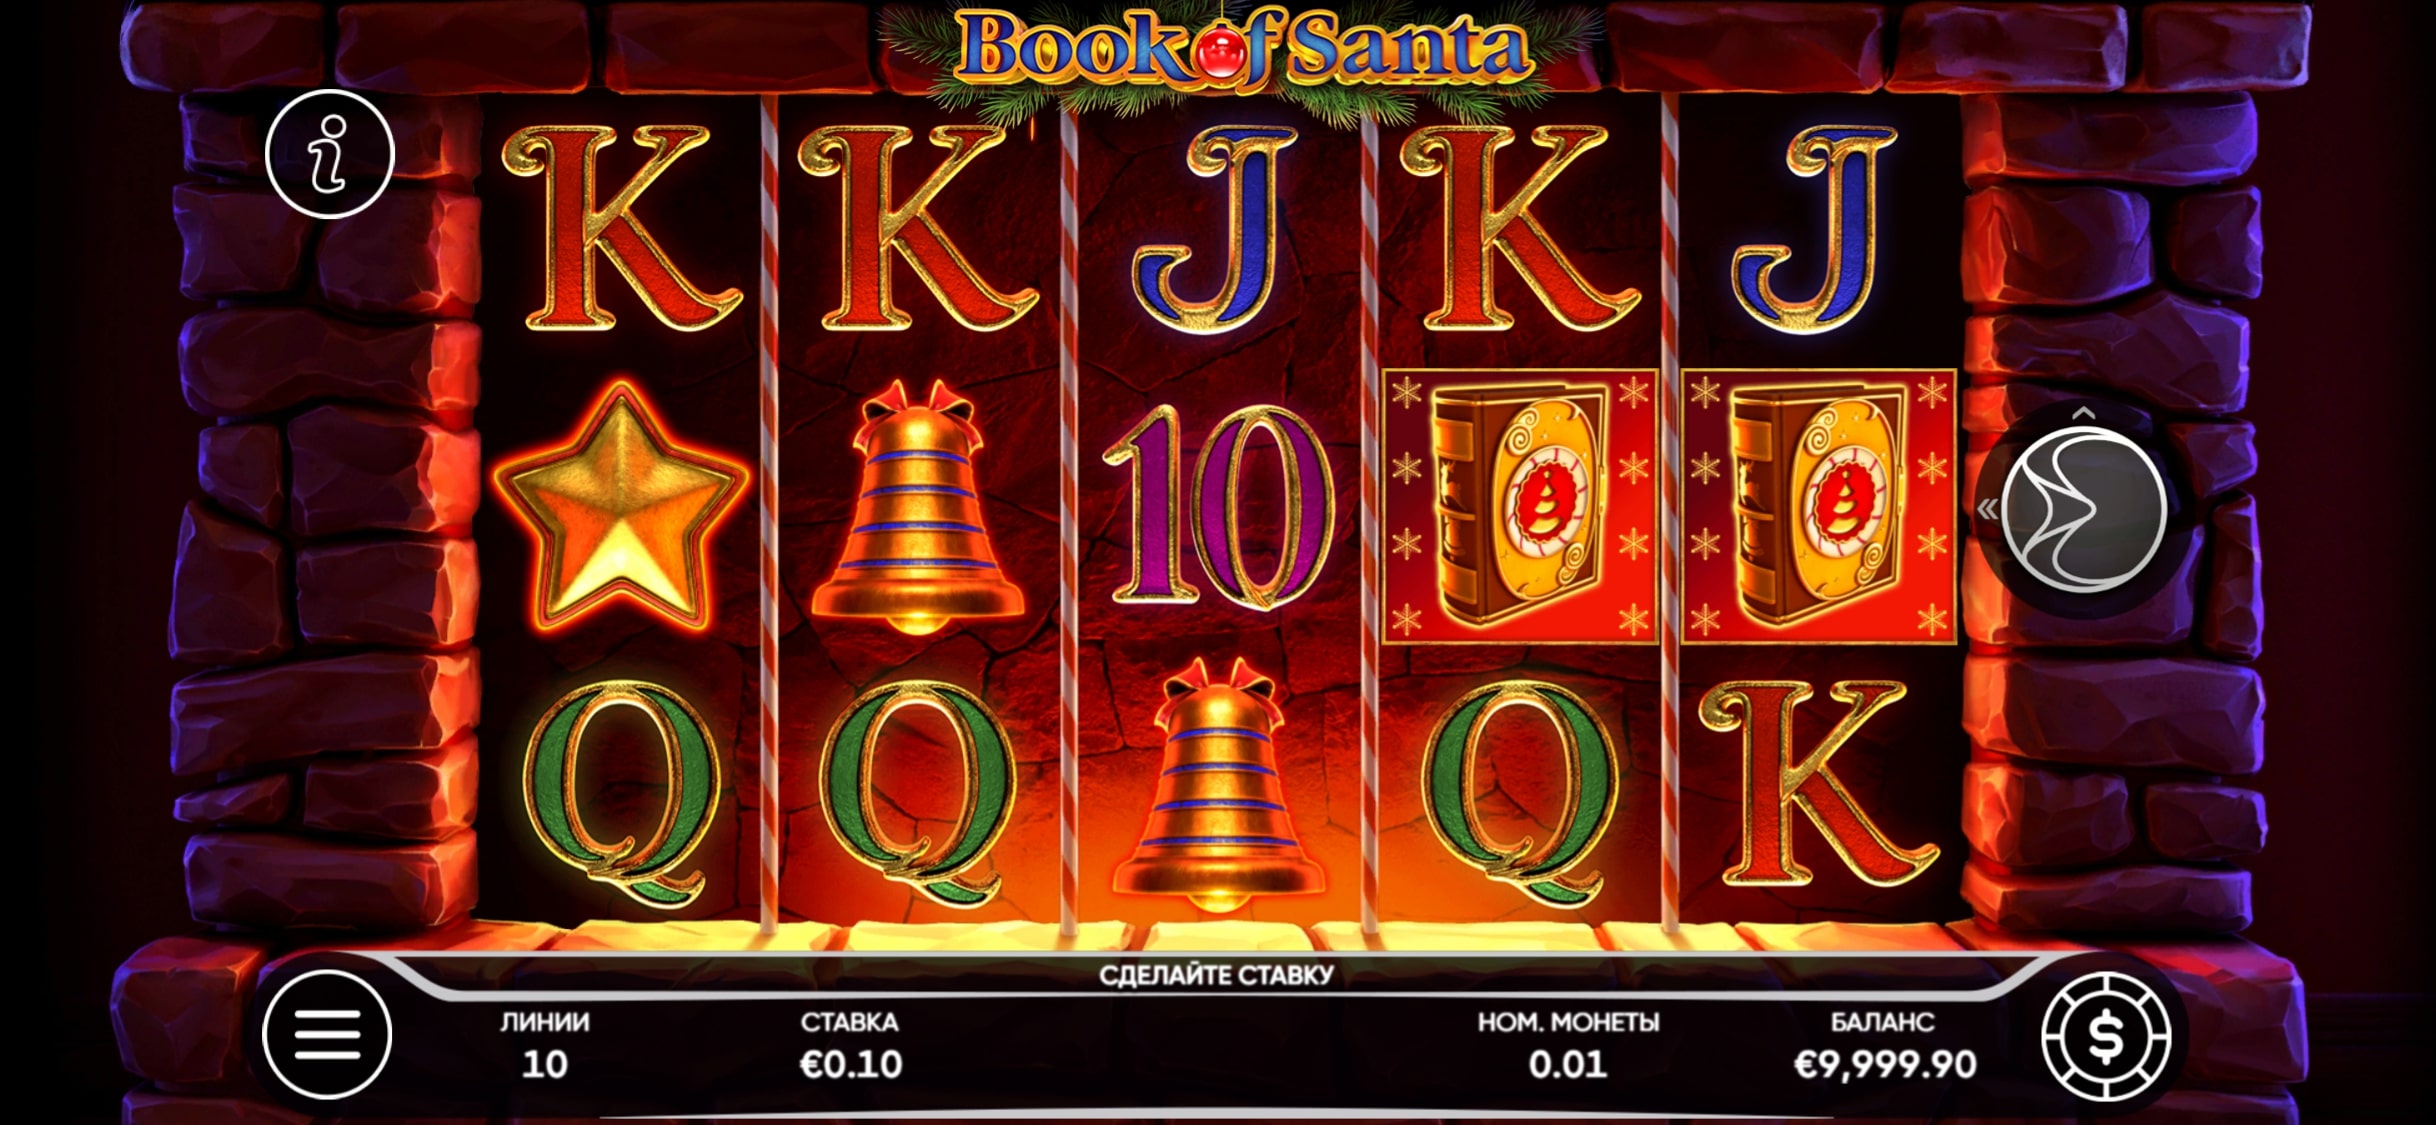 Fortune to Win Casino Mobile Slot Games Review